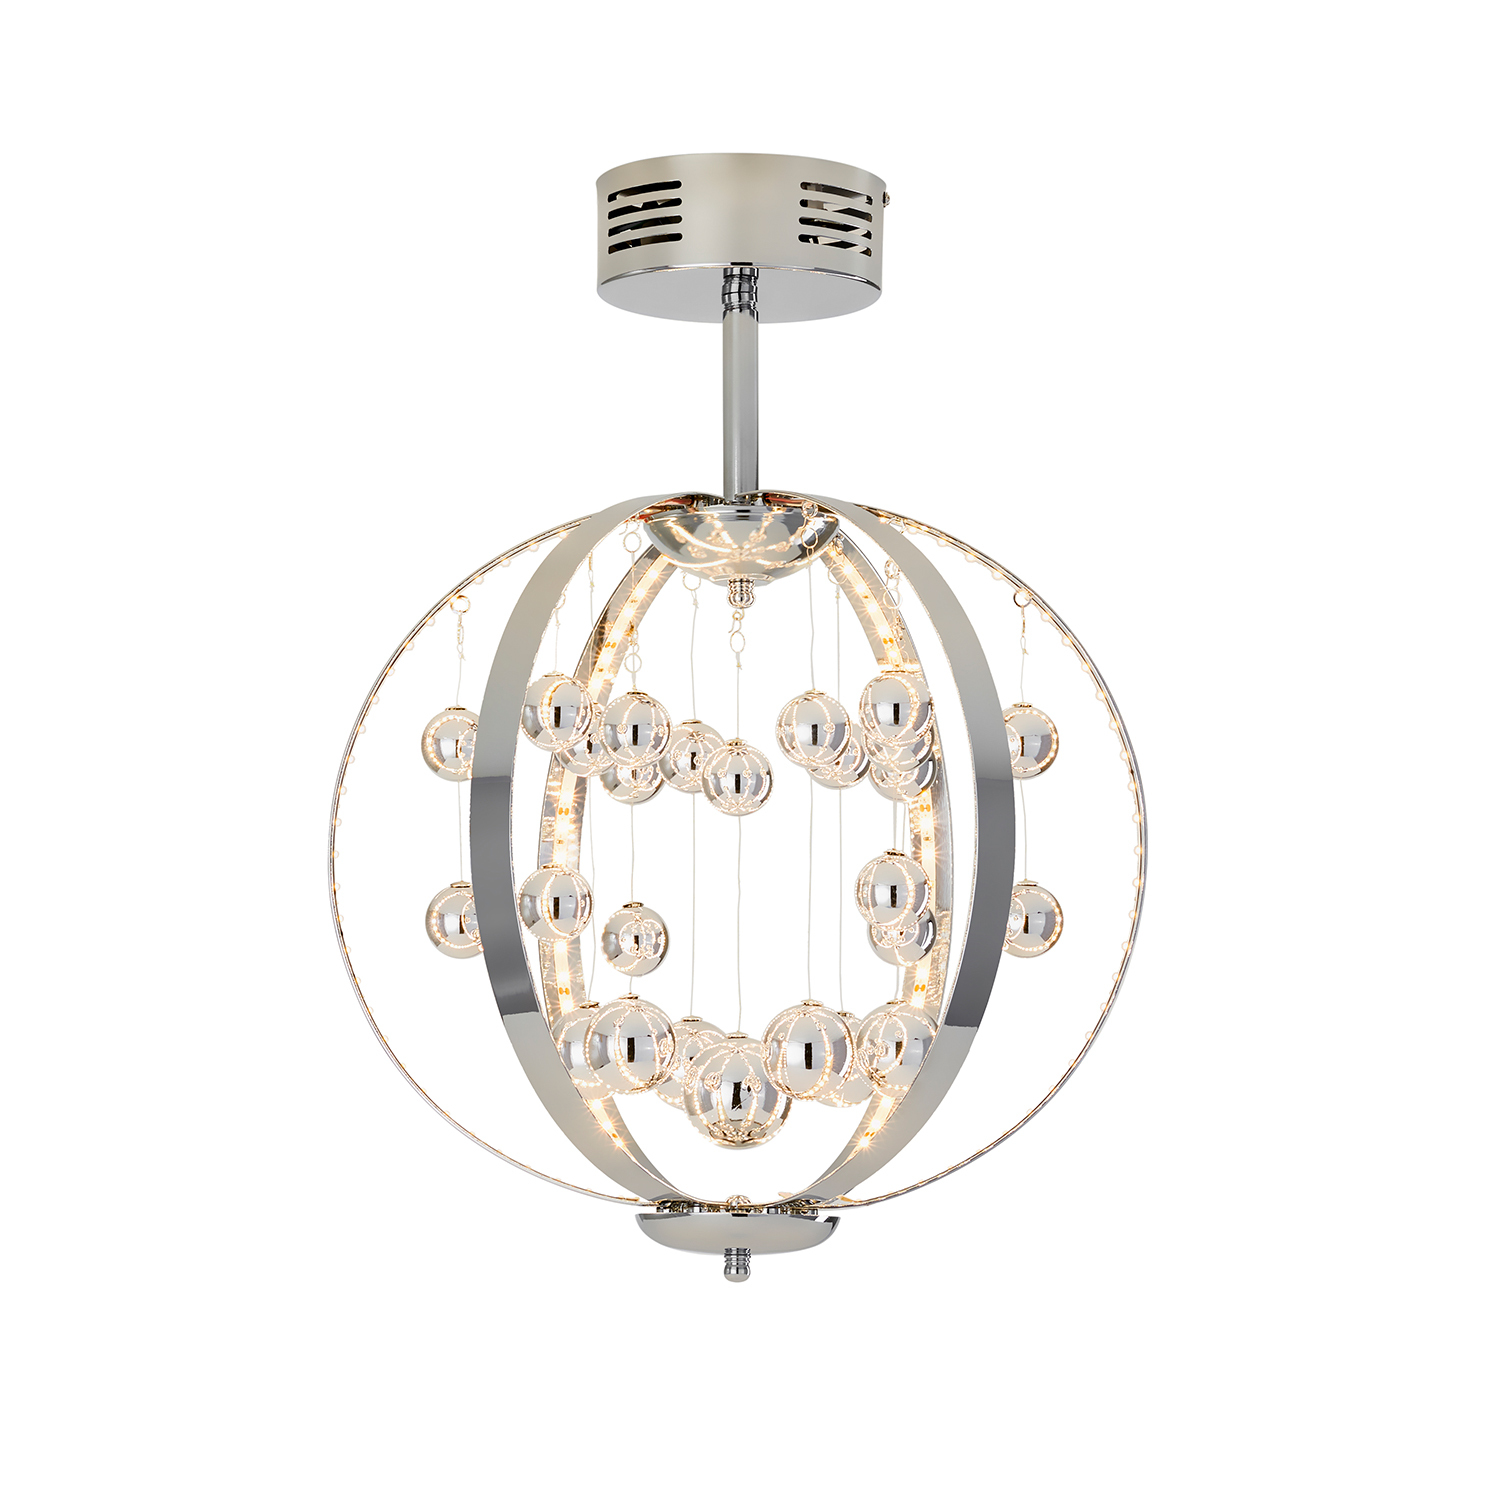 Chrome Orb LED Electrical Ceiling Fitting Image 2